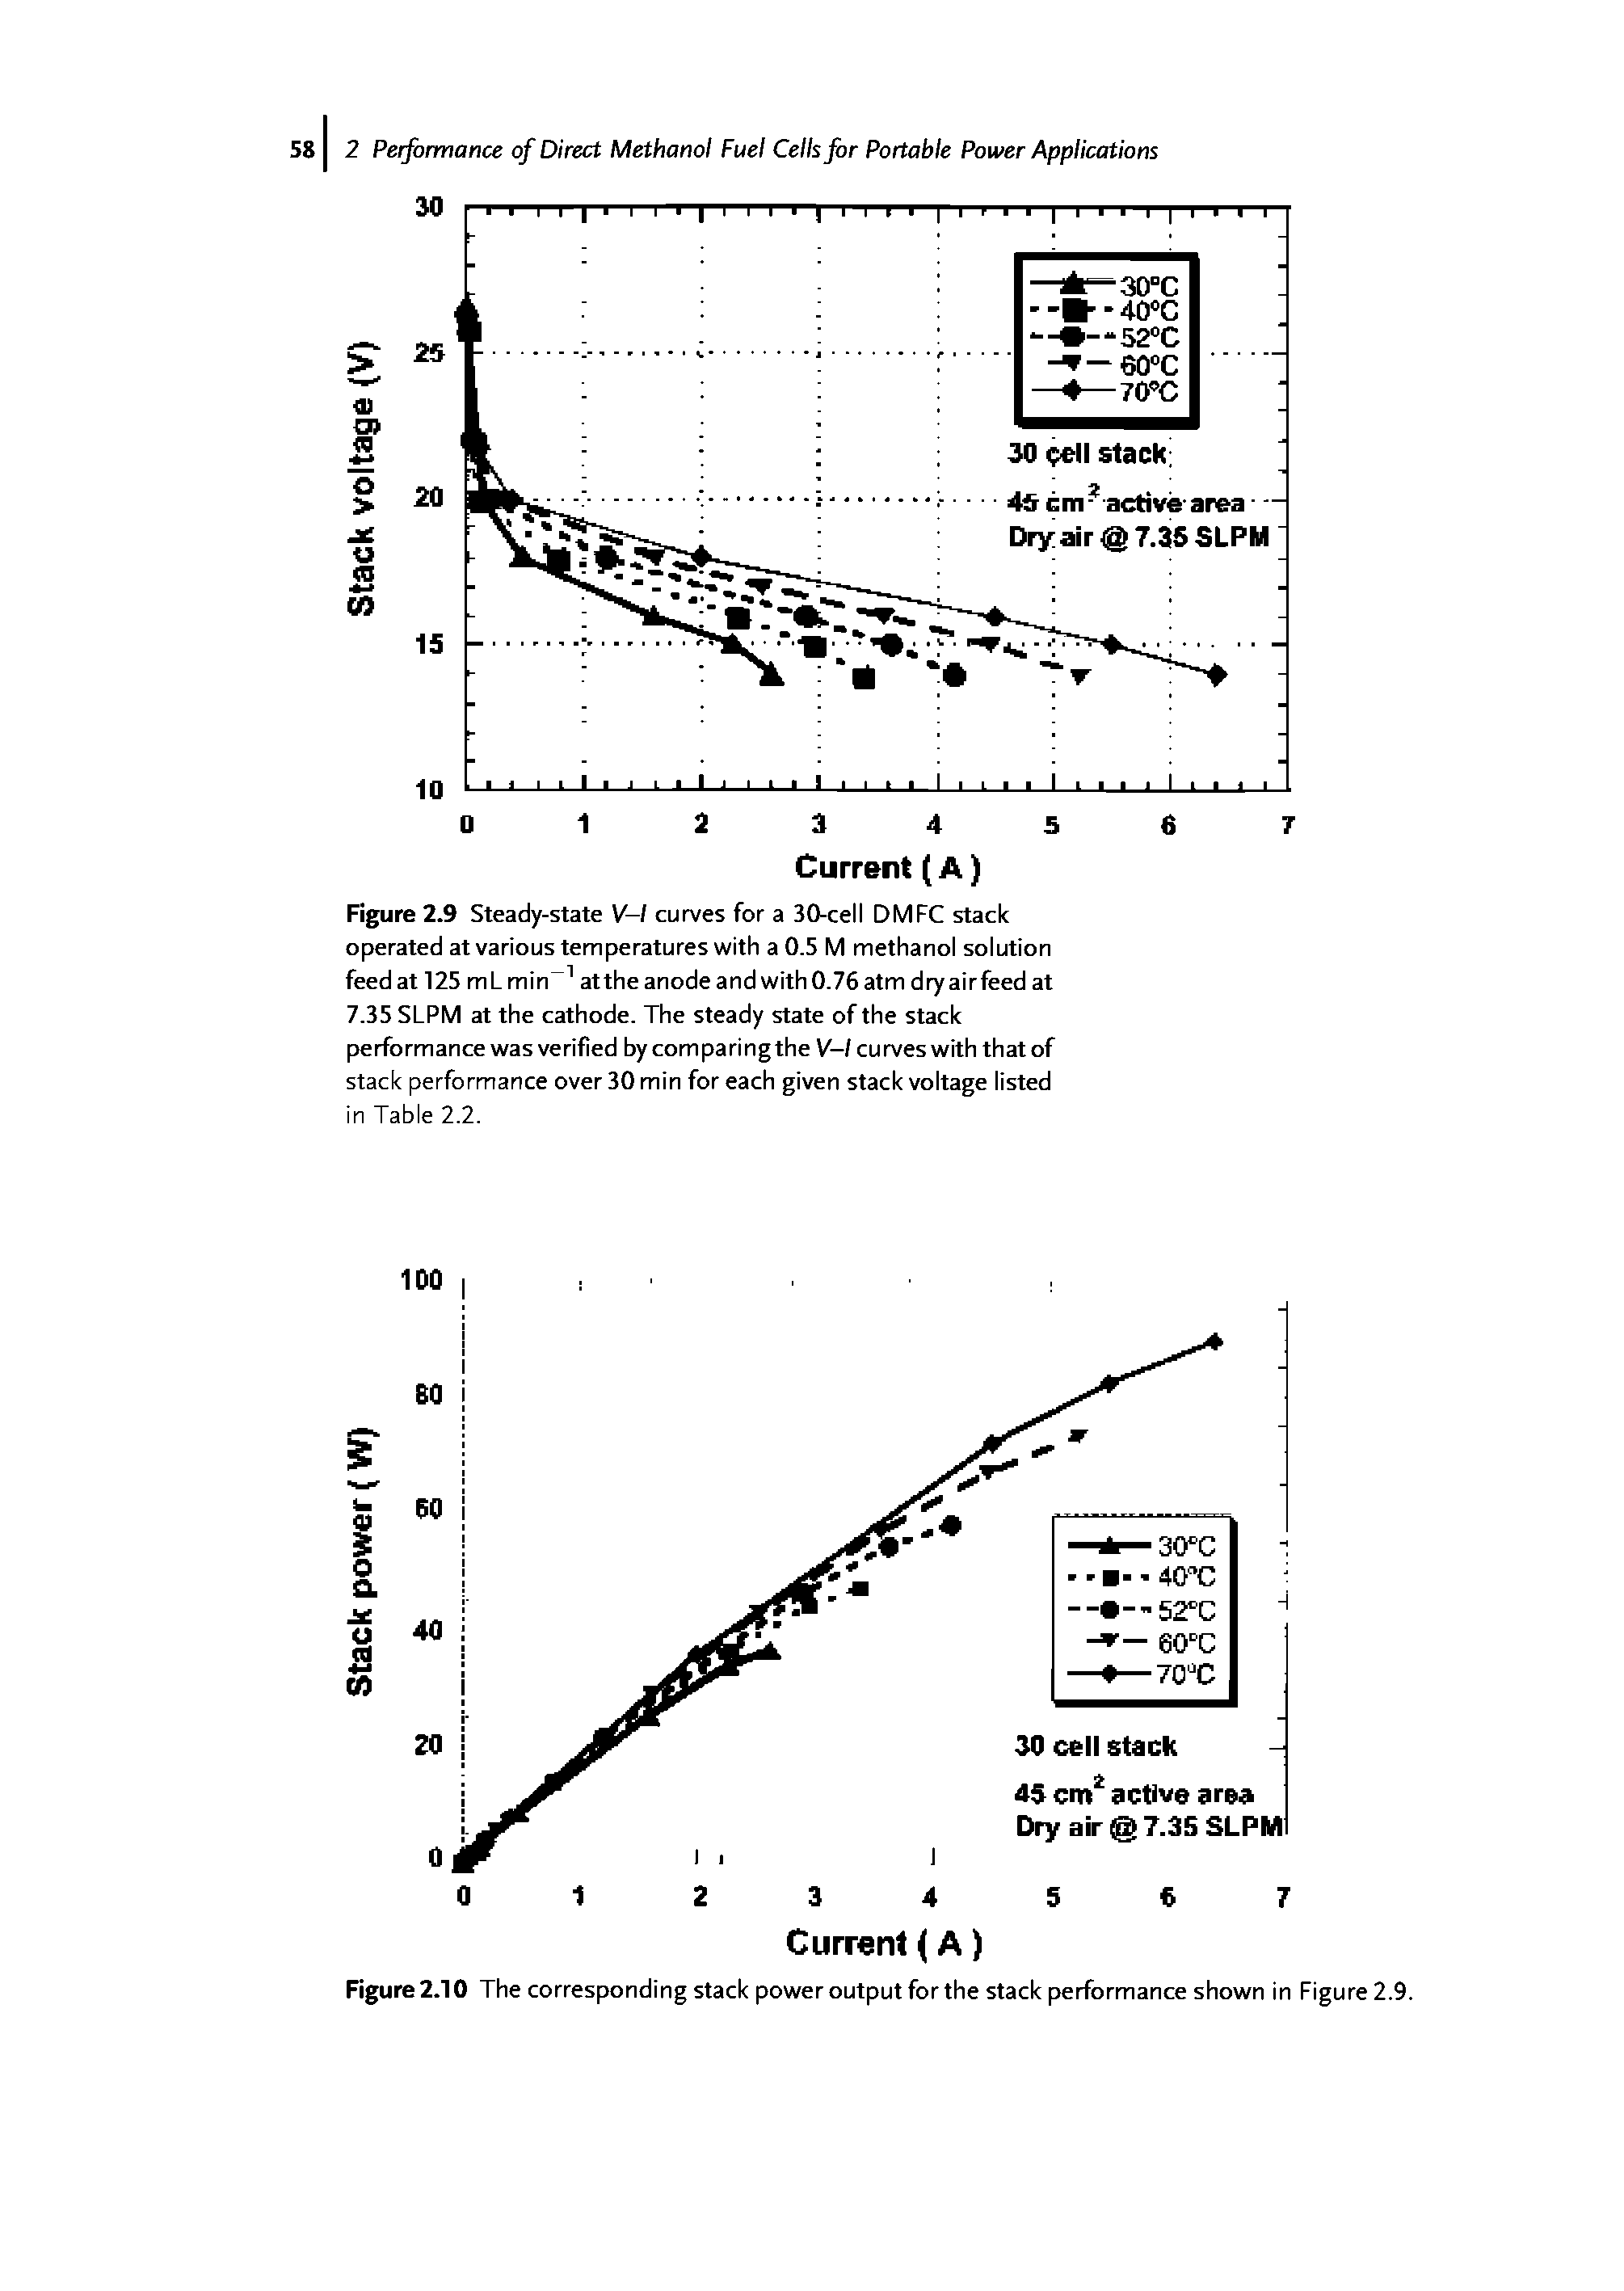 Figure 2.9 Steady-state V-l curves for a 30-cell DMFC stack operated at various temperatures with a 0.5 M methanol solution feed at 125 ml min at the anode and with 0.76 atm dry air feed at 7.35 SLPM at the cathode. The steady state of the stack performance was verified by comparing the V—l curves with that of stack performance over 30 min for each given stack voltage listed in Table 2.2.